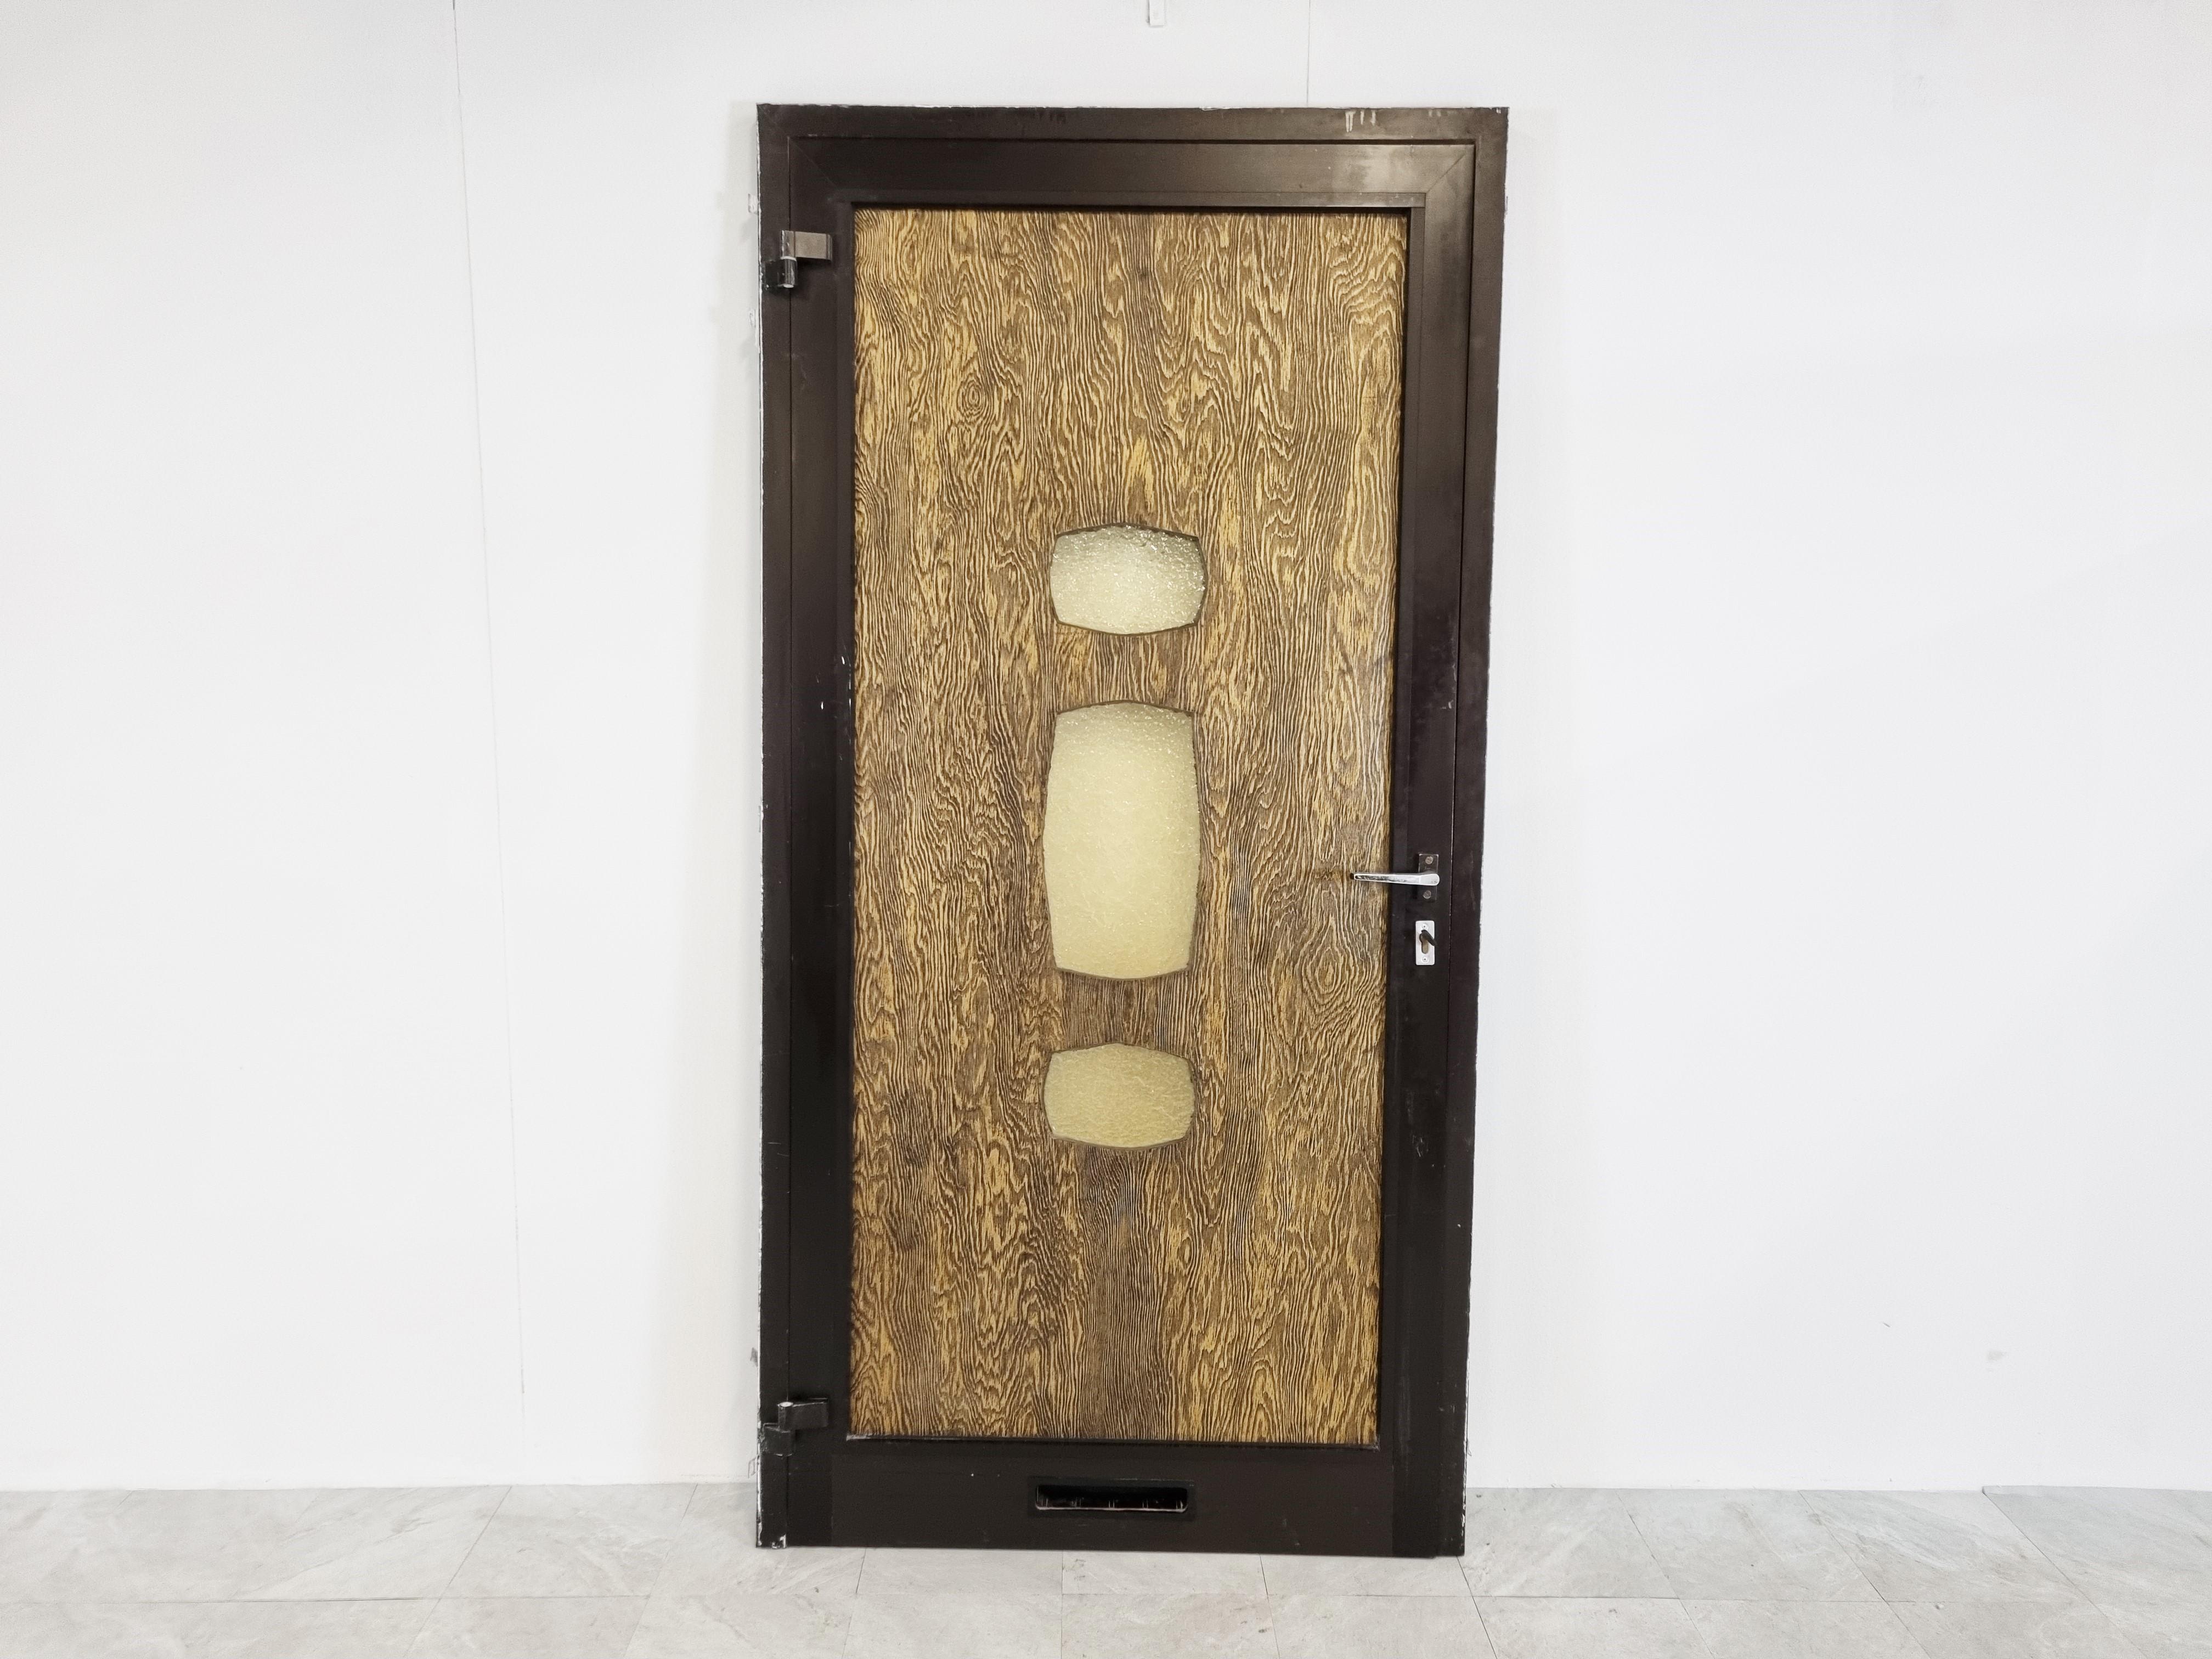 Architectural brutalist front door with copper sculpture at the front, blurred glass windows and a wooden panel at the back.

This is a complete door with door frame.

1970s - Belgium

Measures: Height: 218cm/85.82